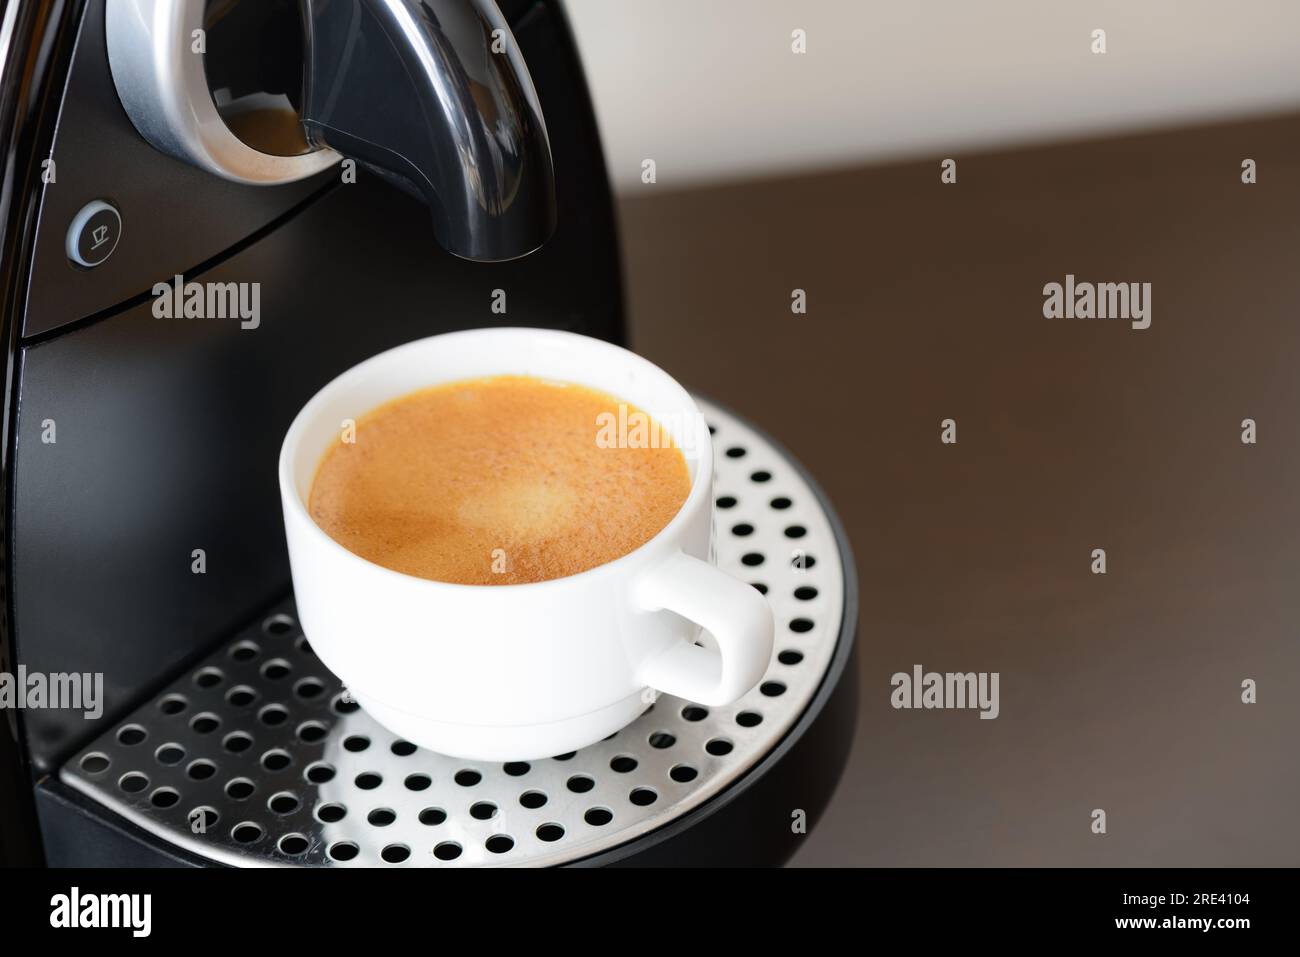 https://c8.alamy.com/comp/2RE4104/a-coffee-machine-and-a-white-cup-with-coffee-is-placed-on-the-wooden-table-2RE4104.jpg